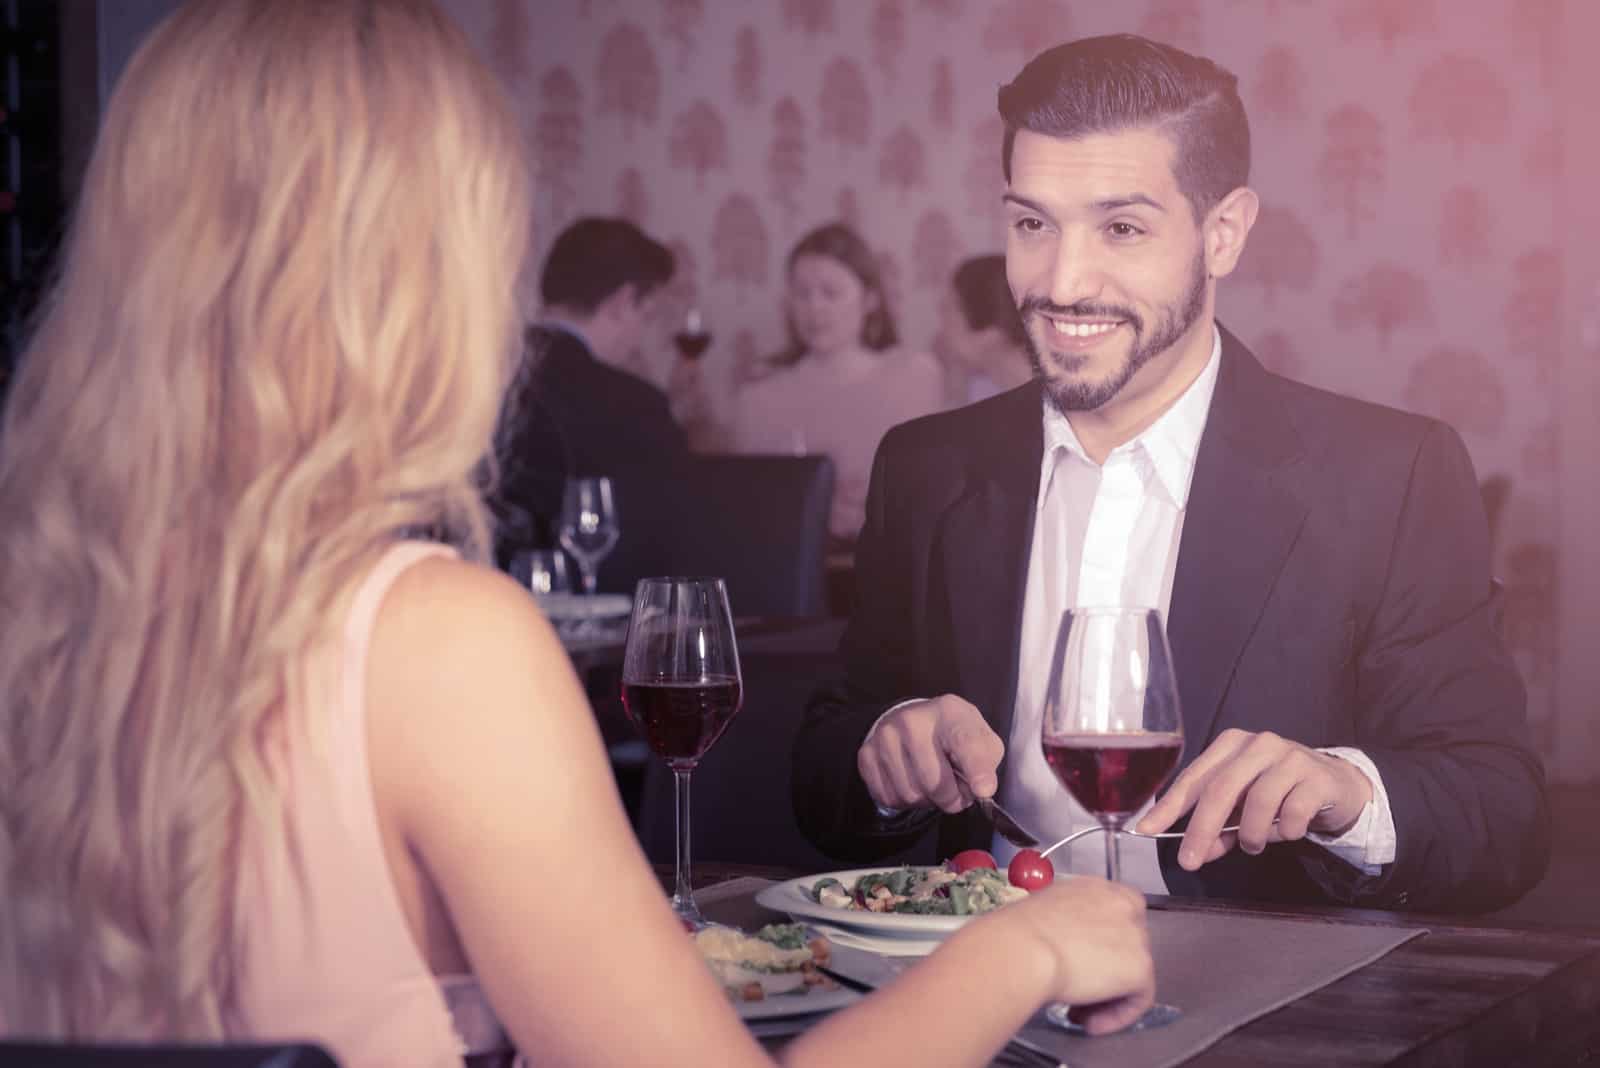 a smiling man sits at a table with a woman and eats